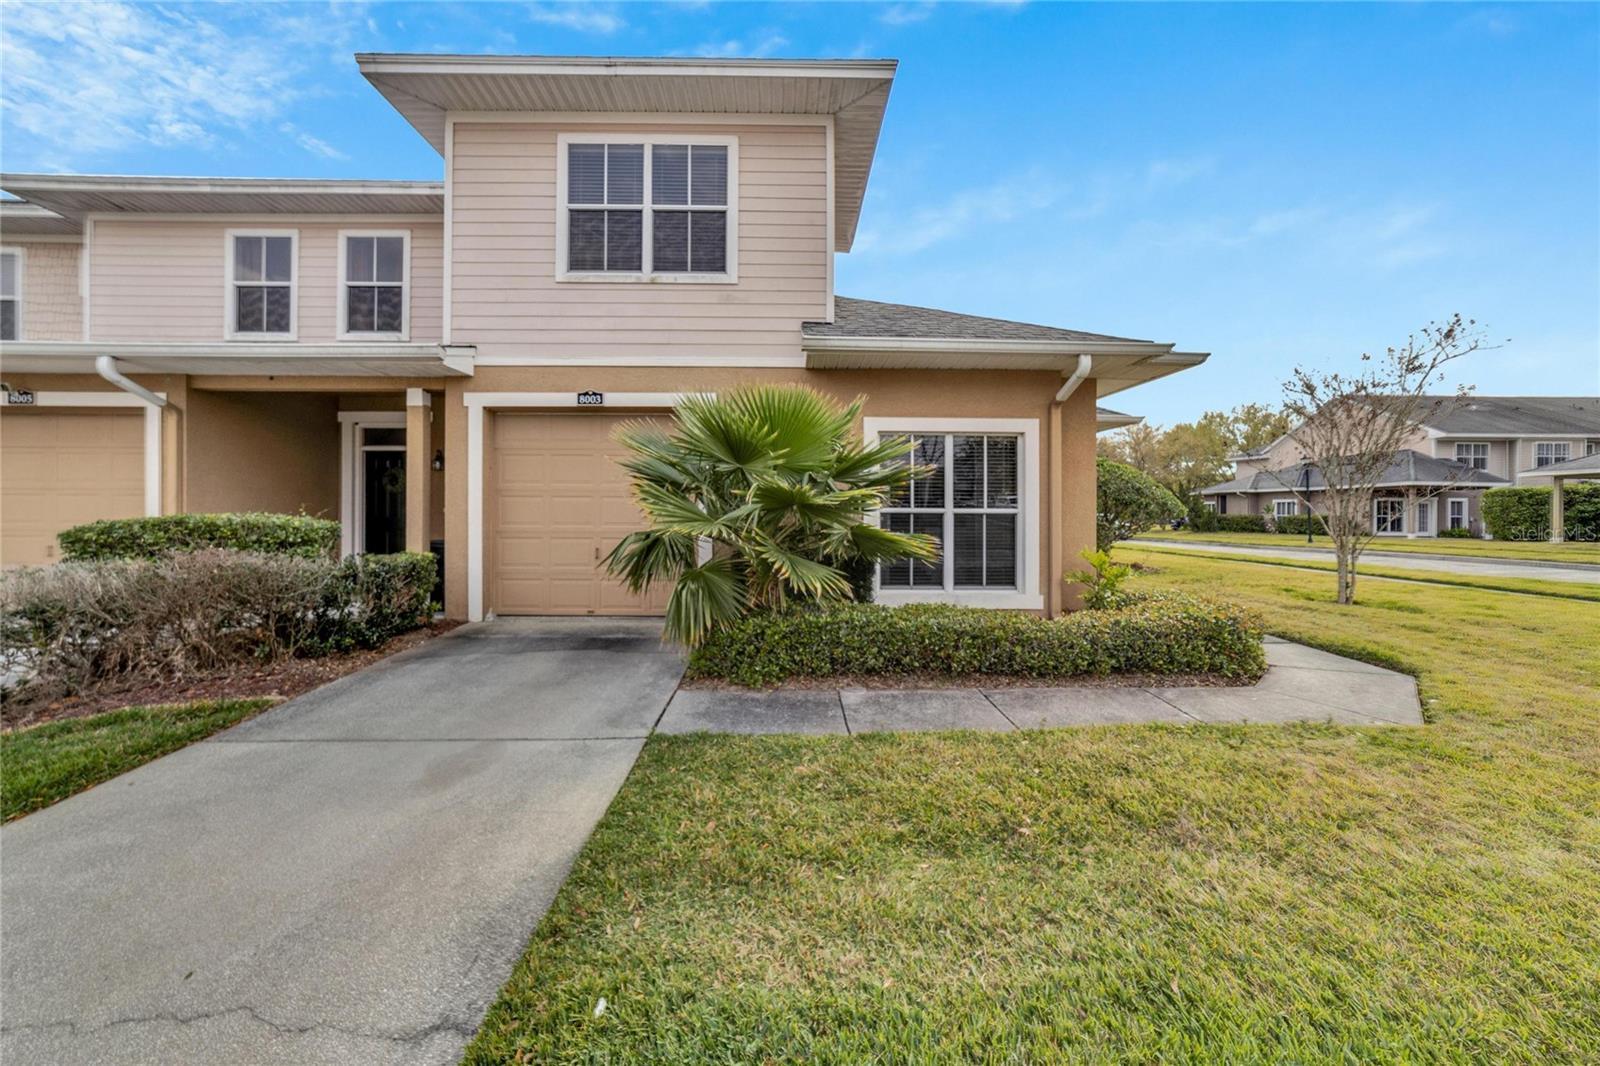 Photo one of 8003 Tipperary Ln Tampa FL 33610 | MLS T3504789